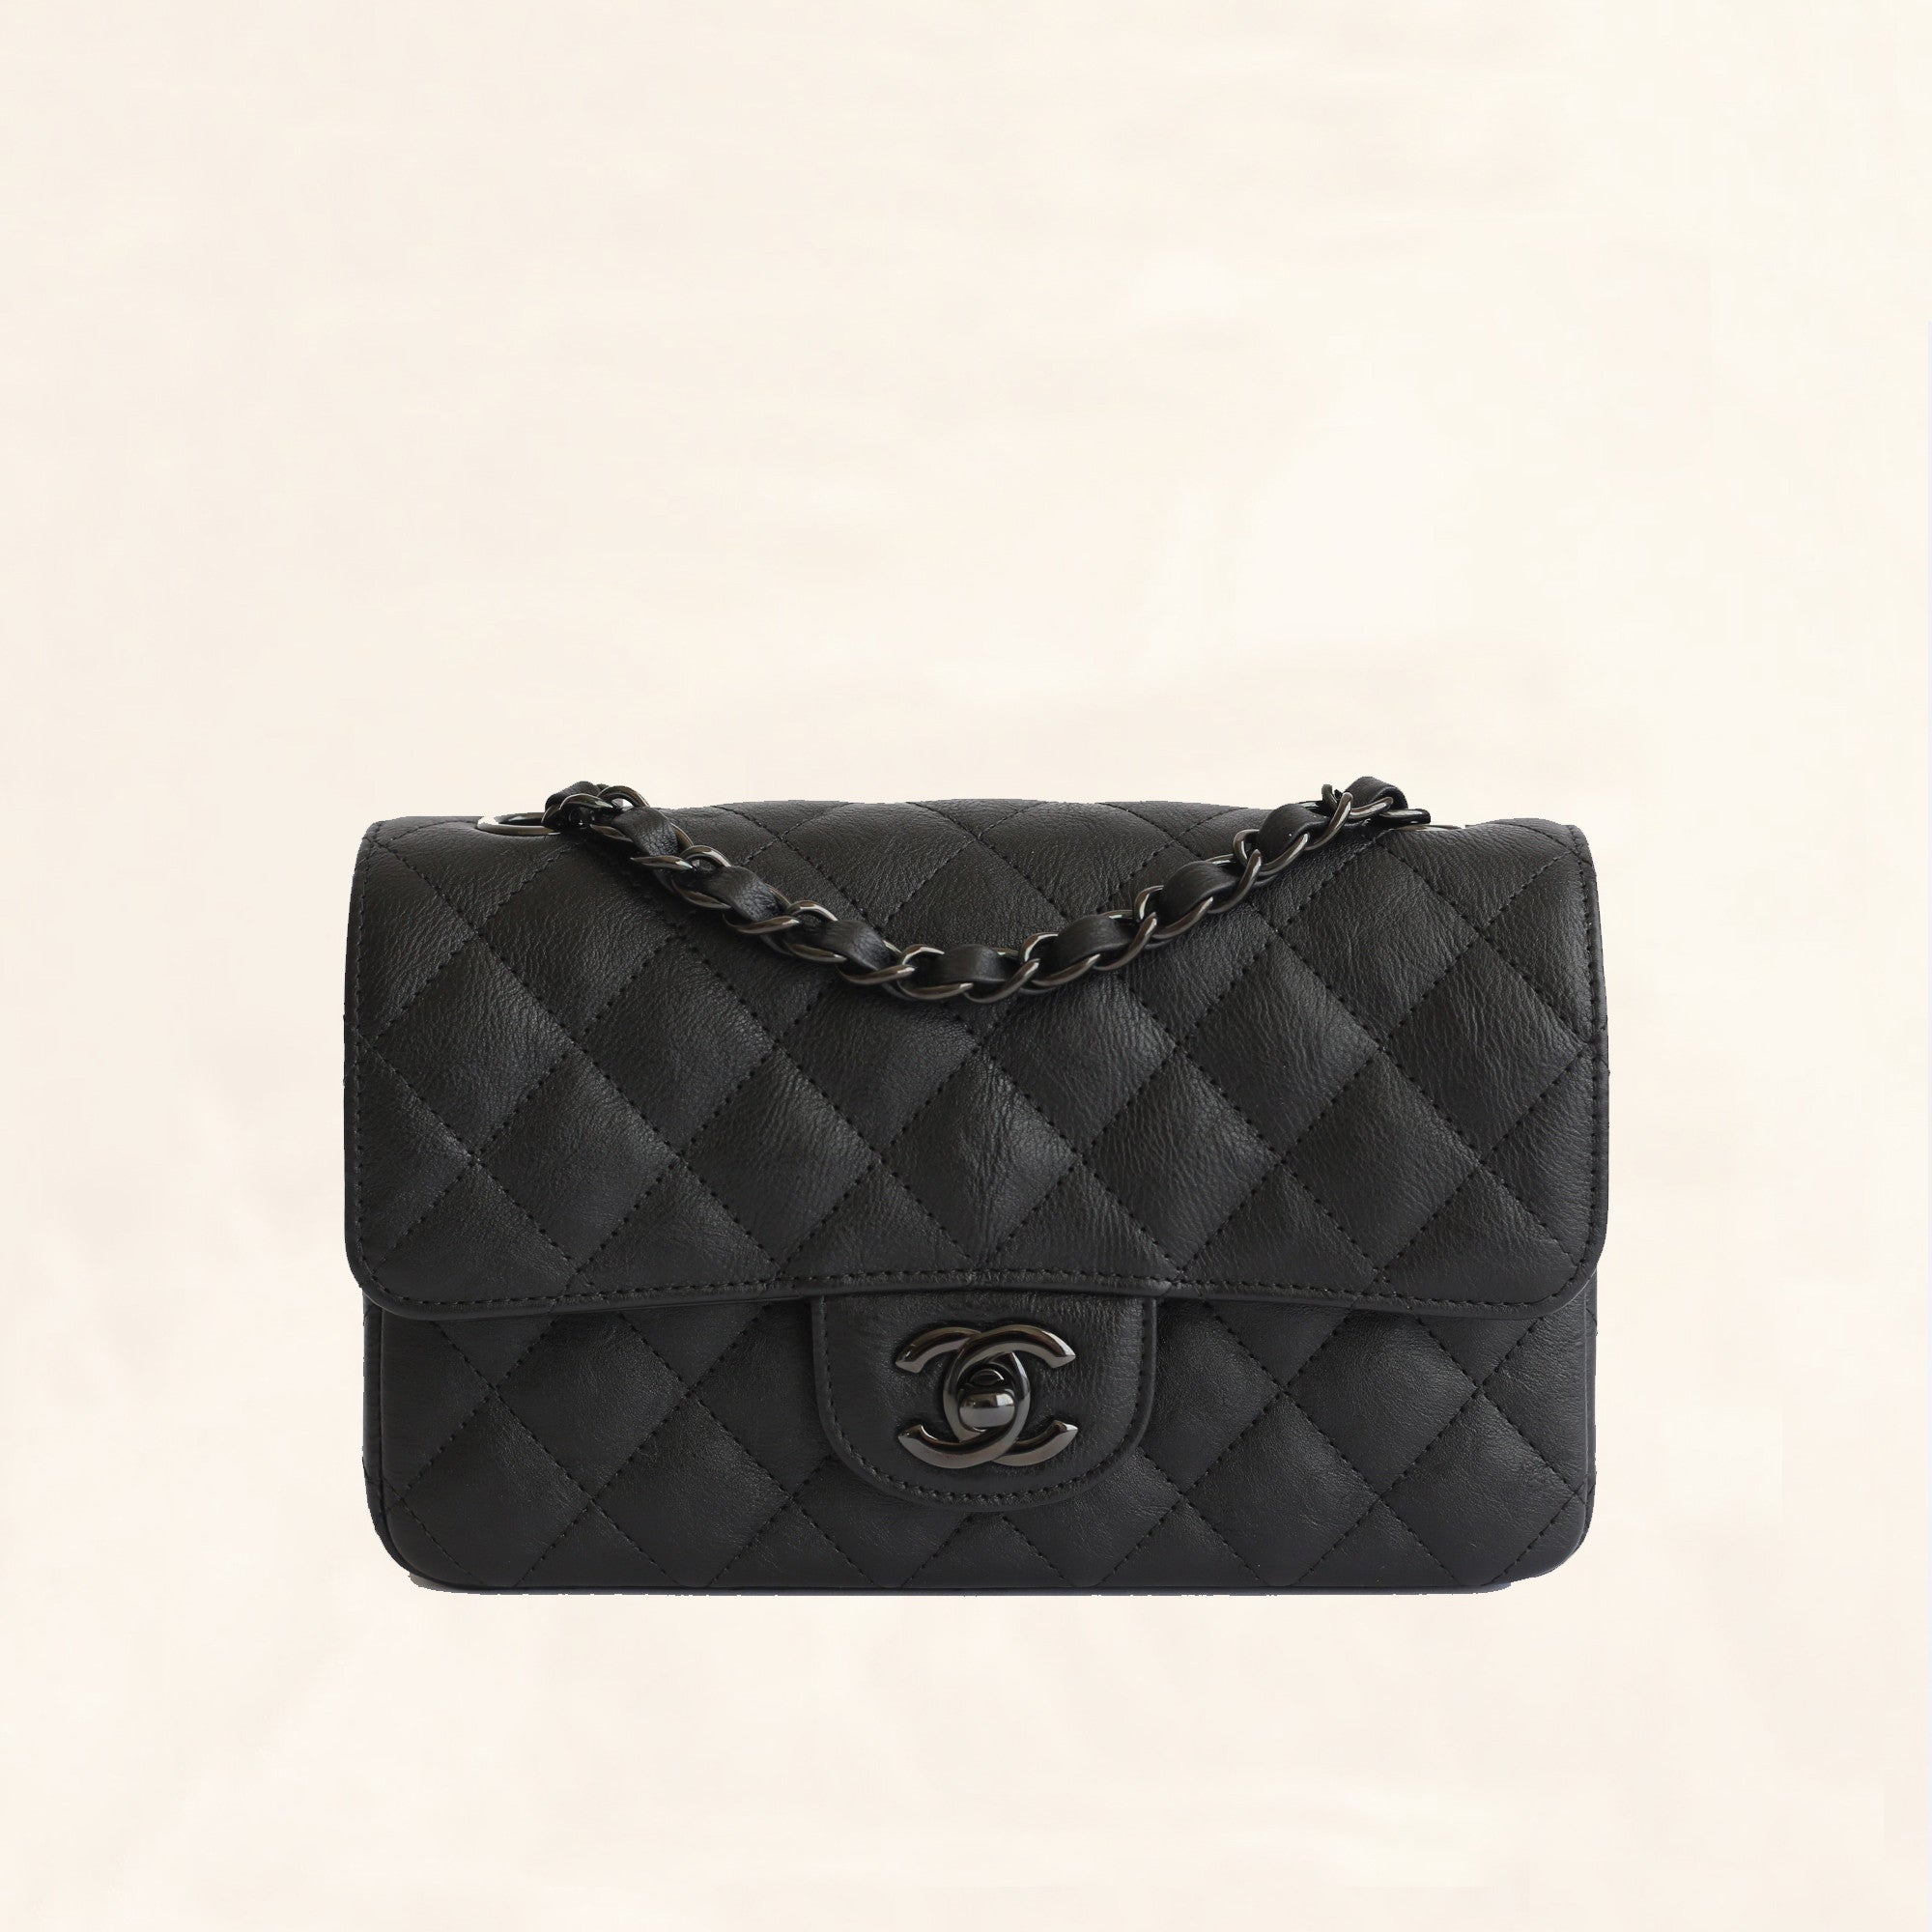 Chanel So Black Black Quilted Caviar Leather Medium Boy Bag  Lot 58005   Heritage Auctions